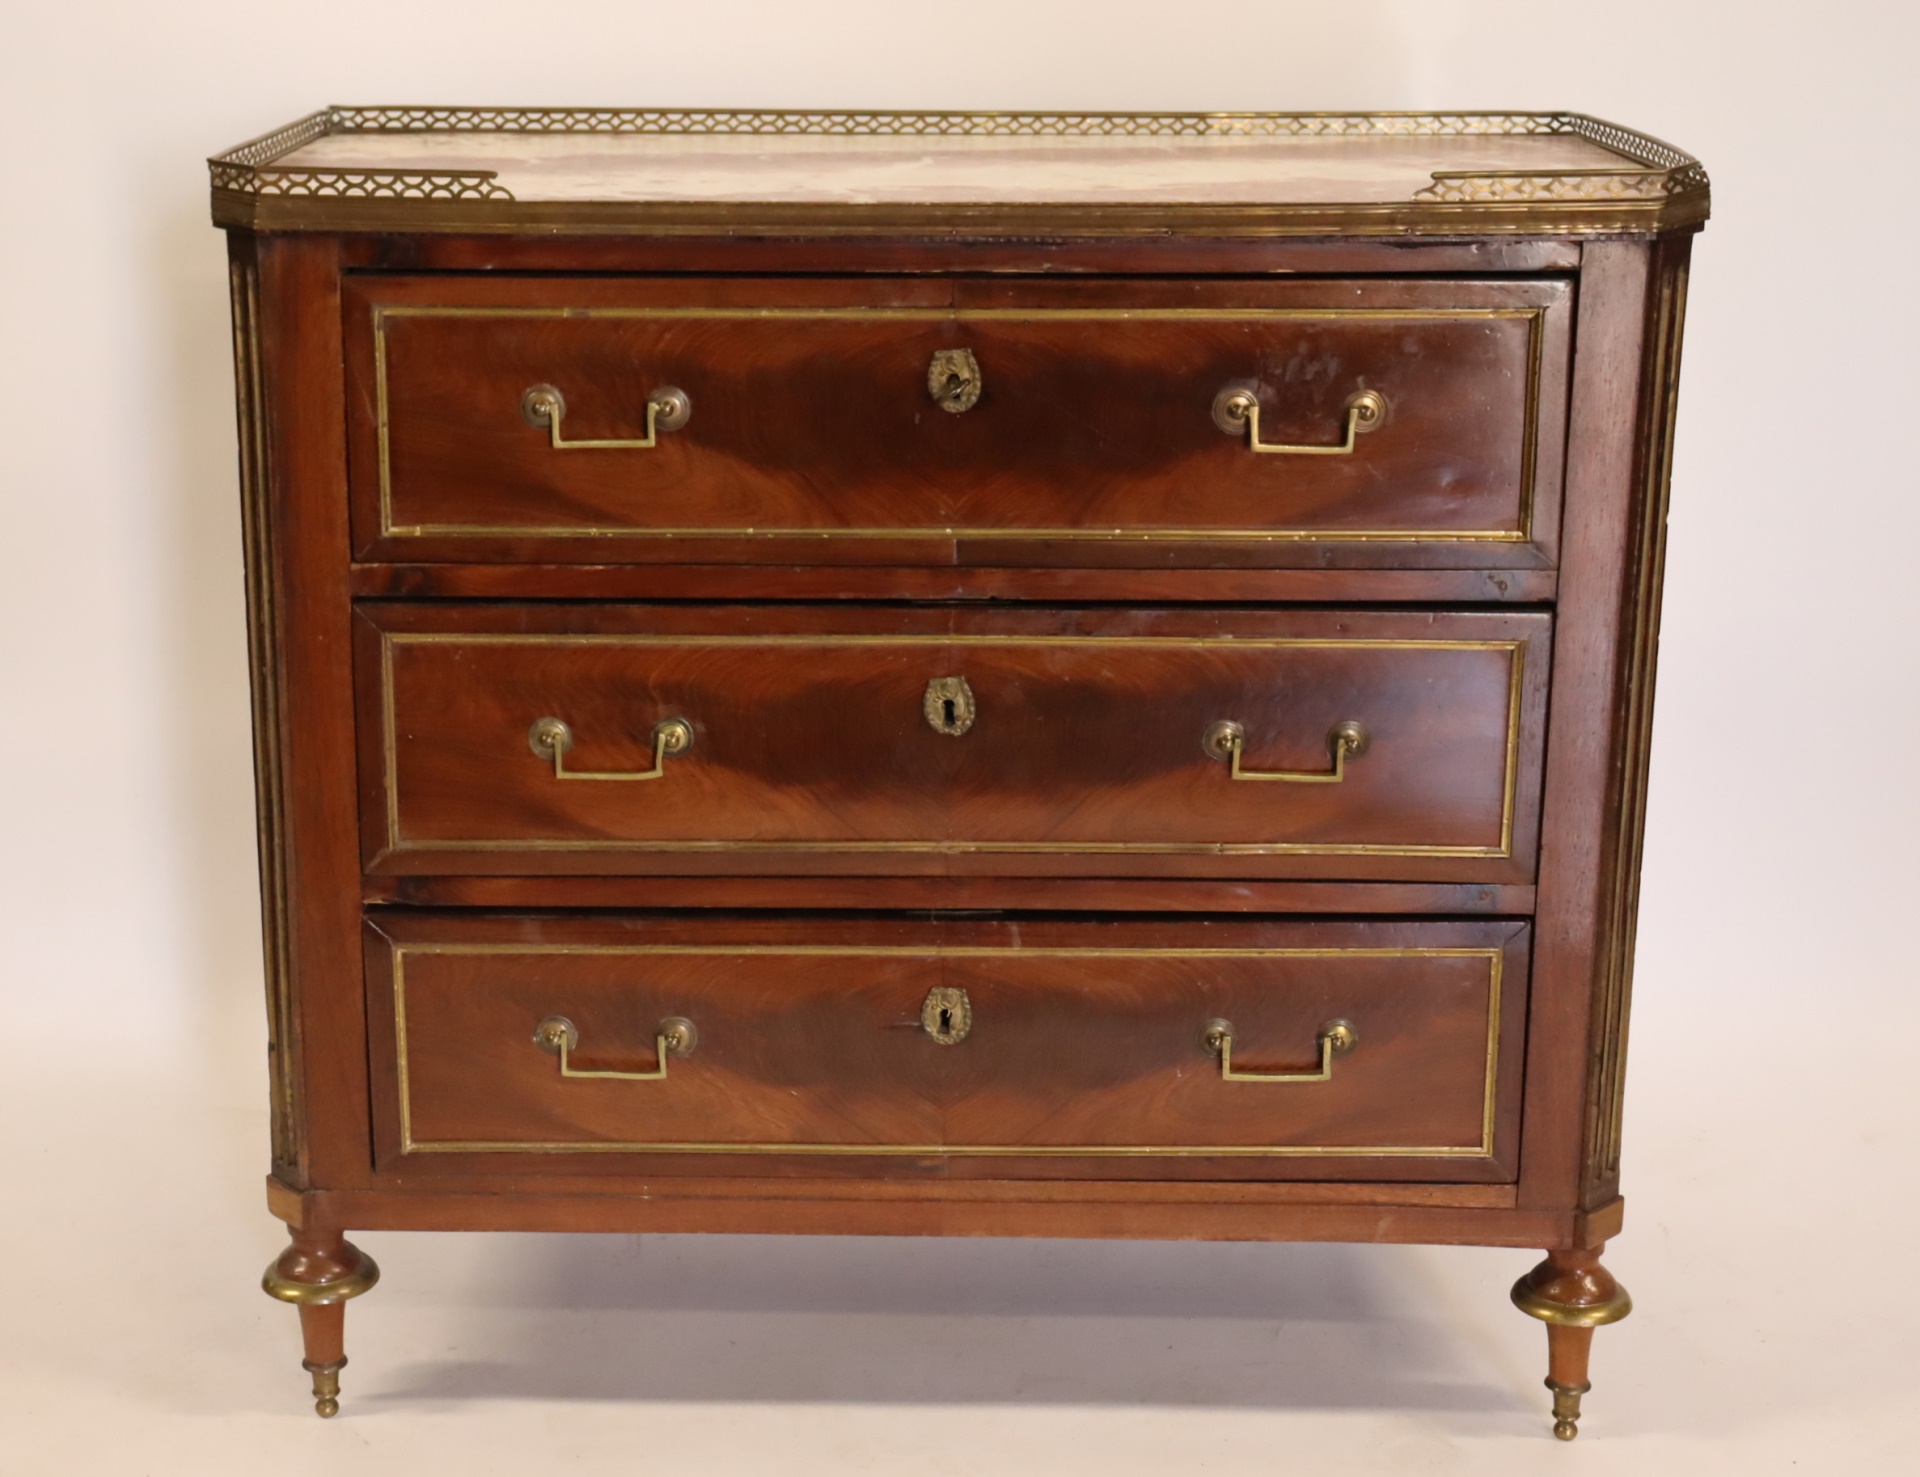 ANTIQUE LOUIS XV1 STYLE MARBLETOP